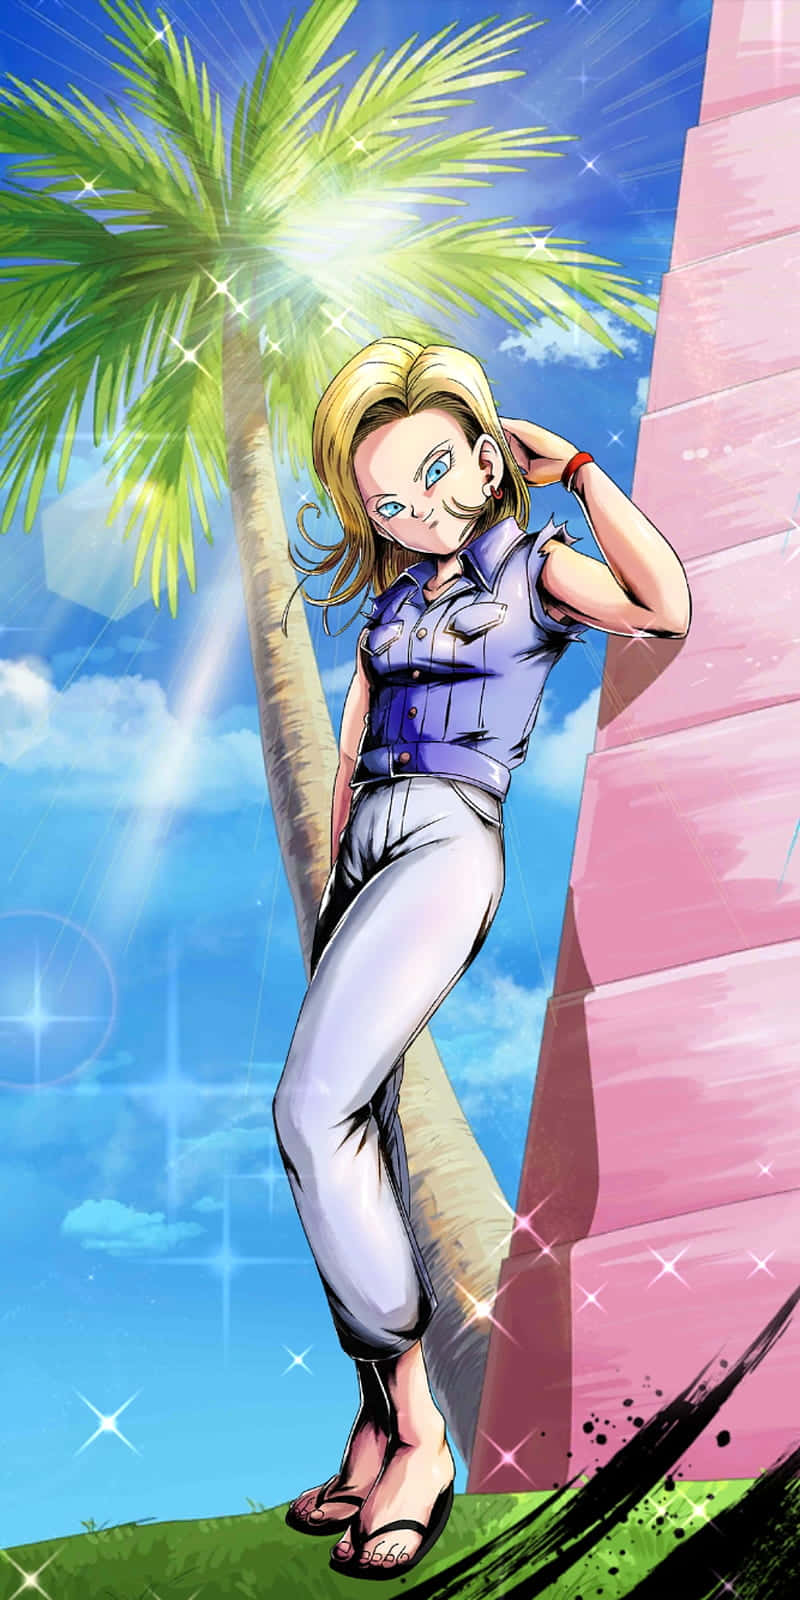 Androidanime Dragon Ball Android 18 In Italian Can Be Translated As 